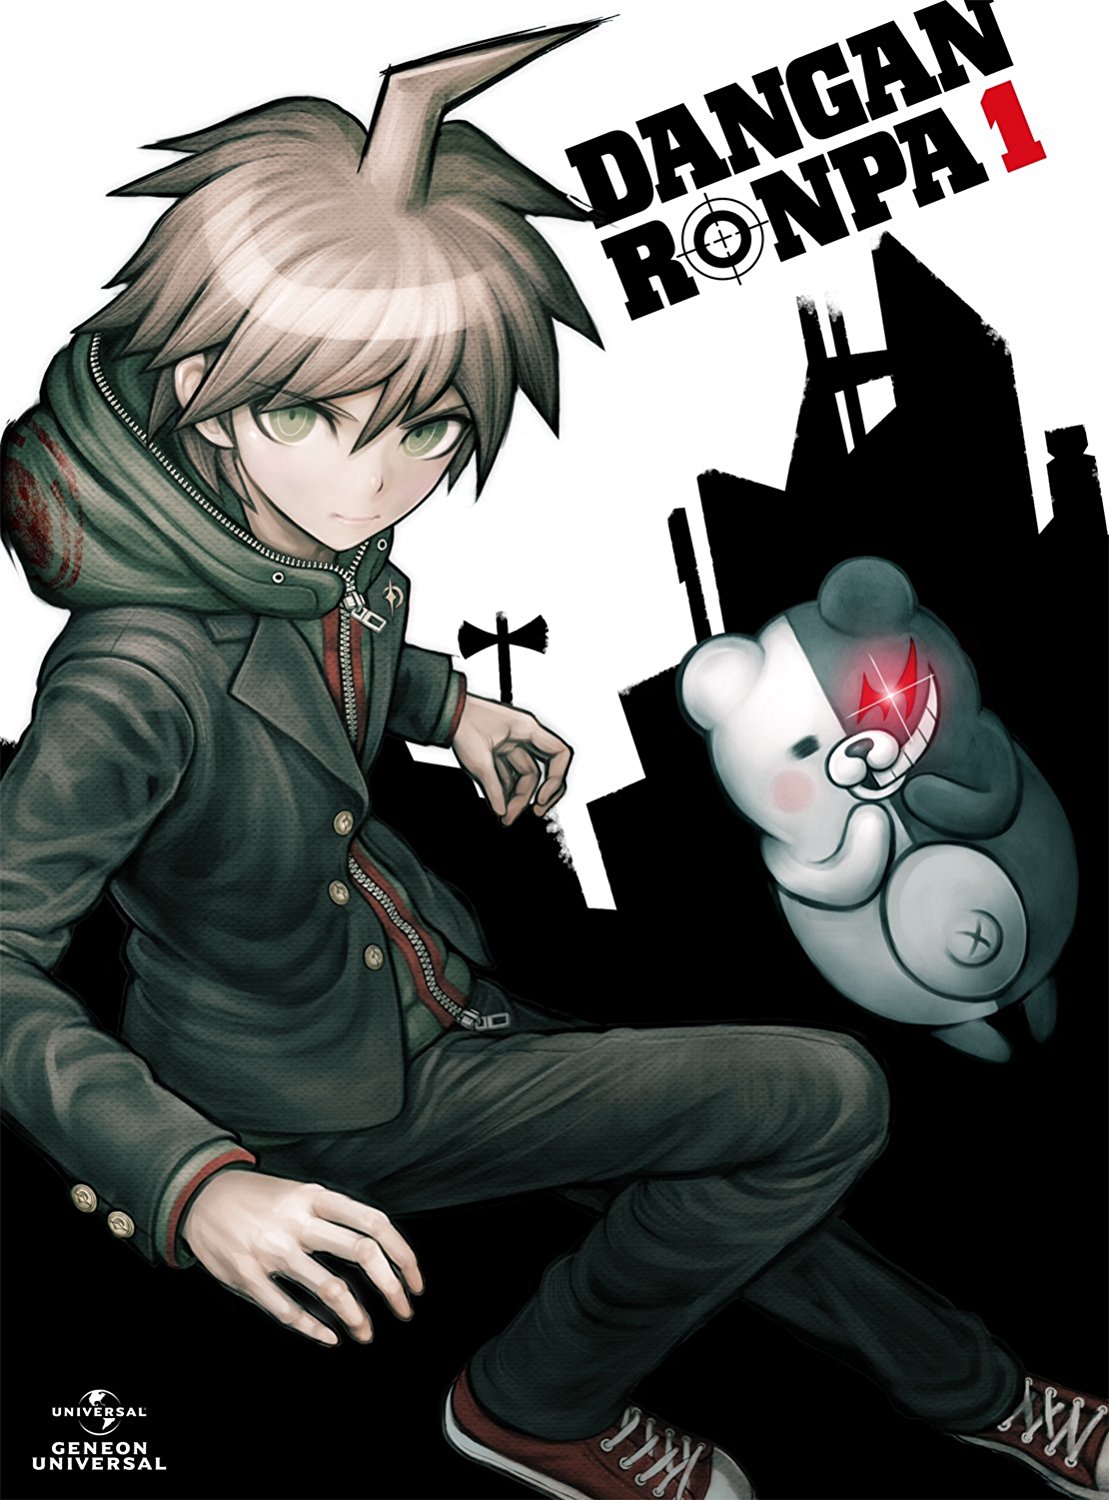 Danganronpa: Who Created Monokuma? & 9 Other Questions About The Anime,  Answered